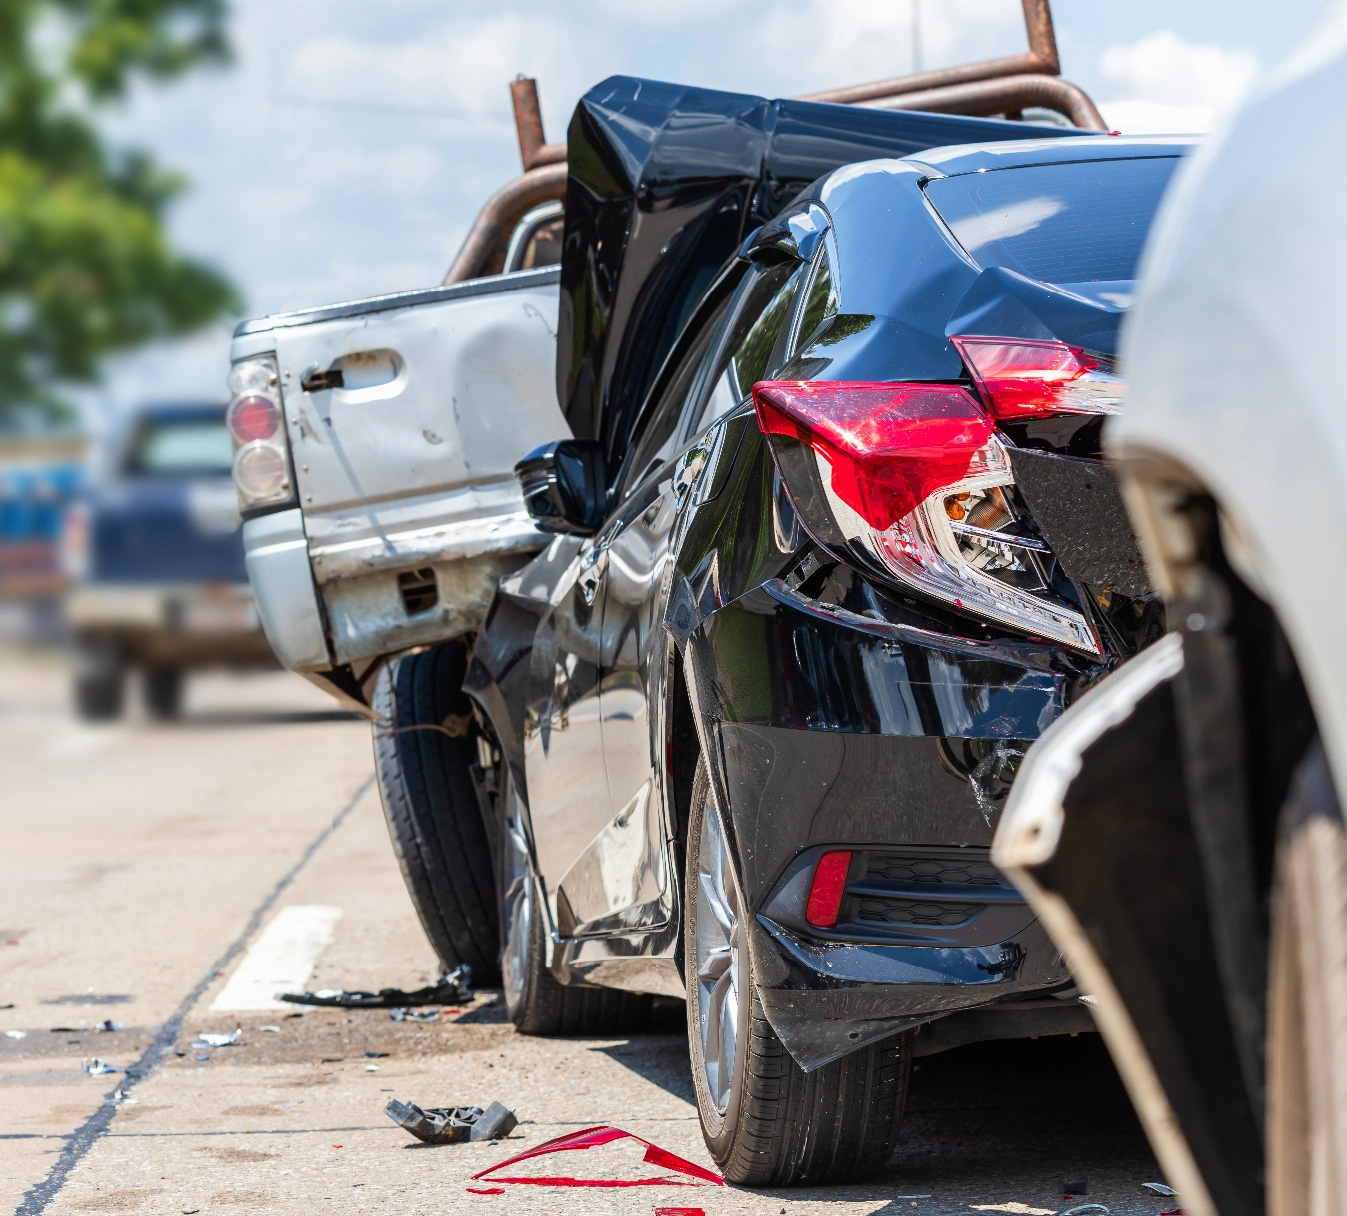 New York City Car Accident Lawyers